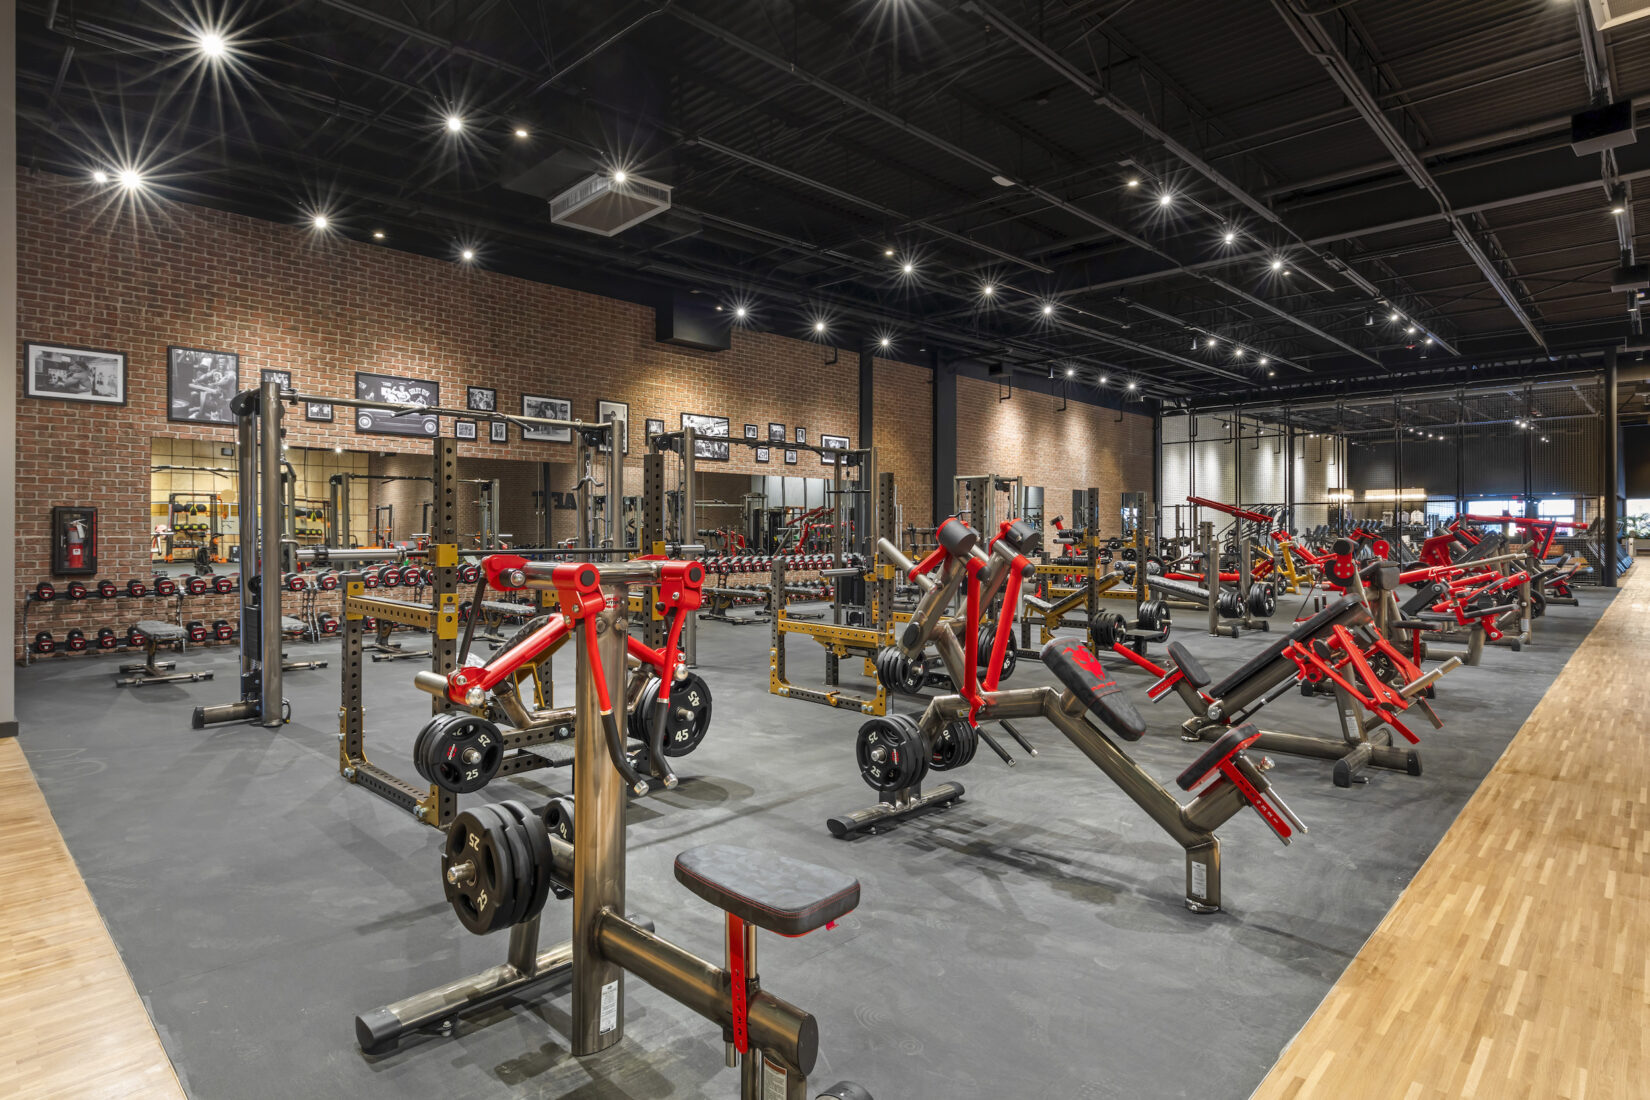 The interior of a Golds Gym in Washington.